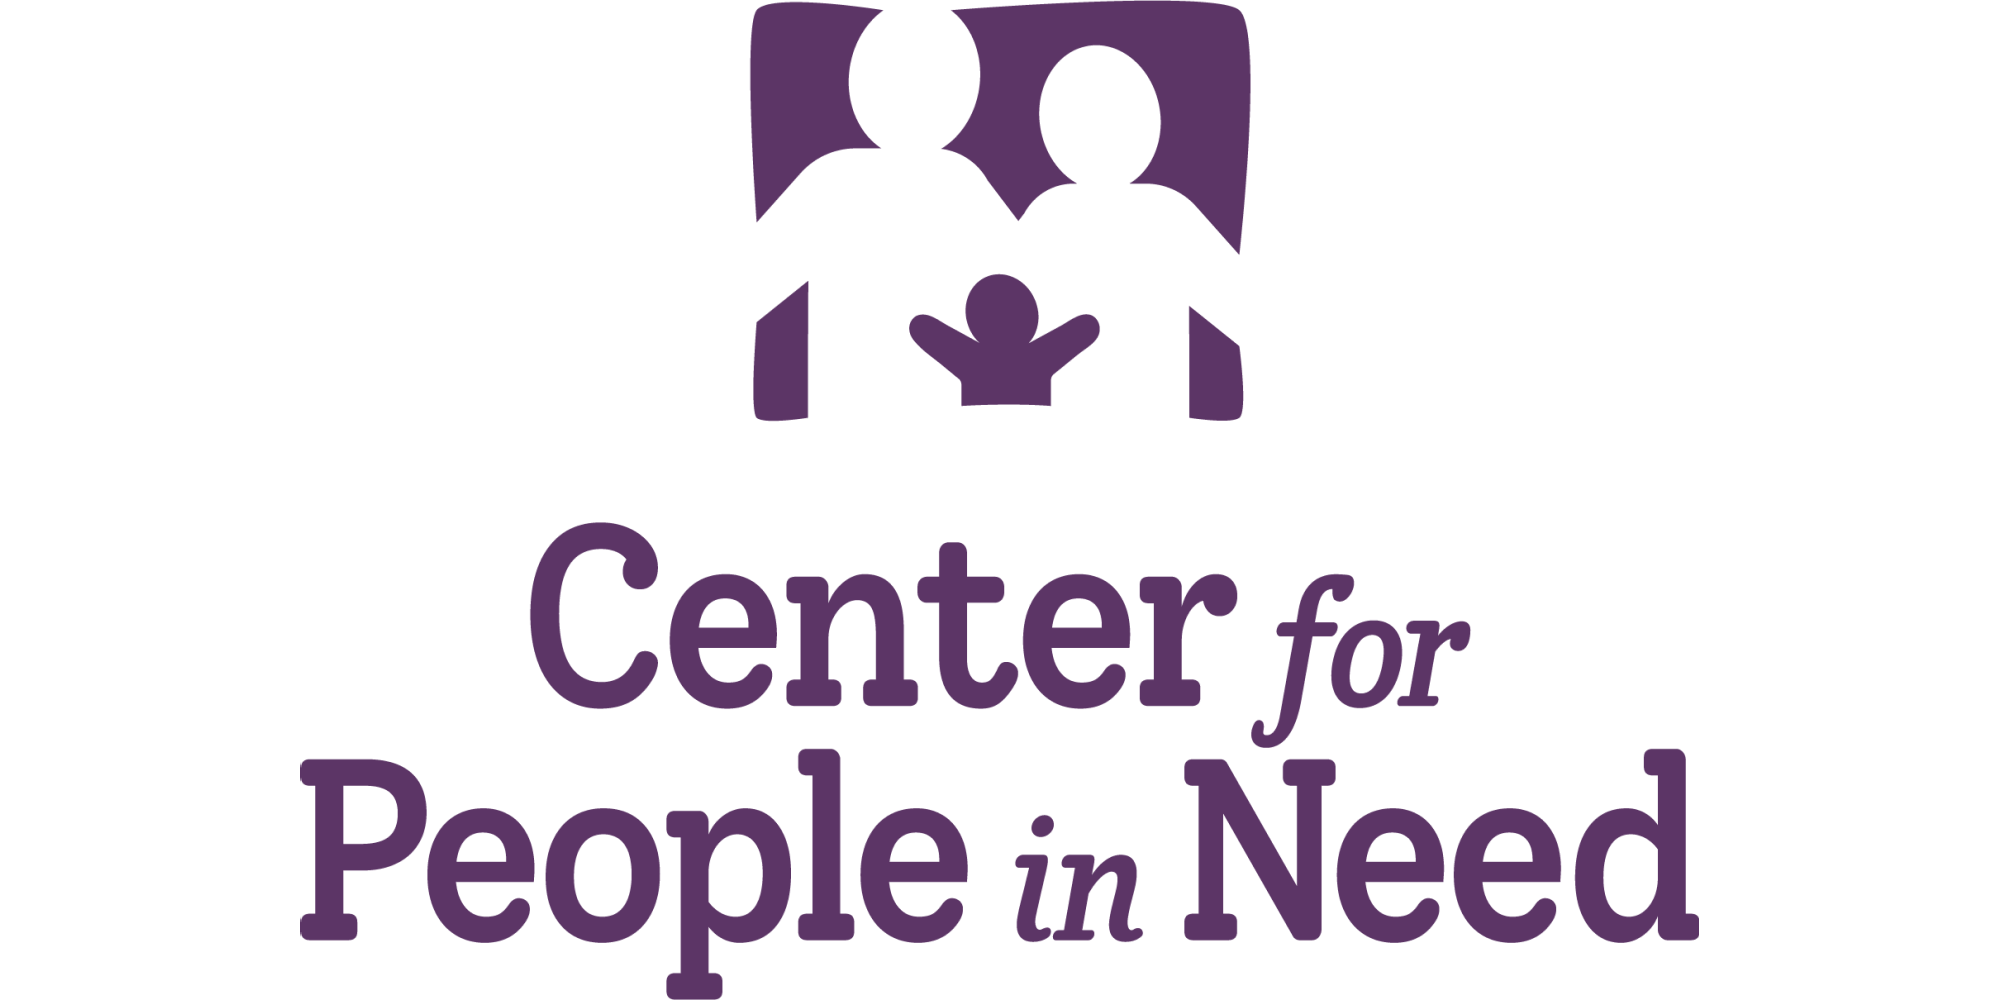 Center for People in Need